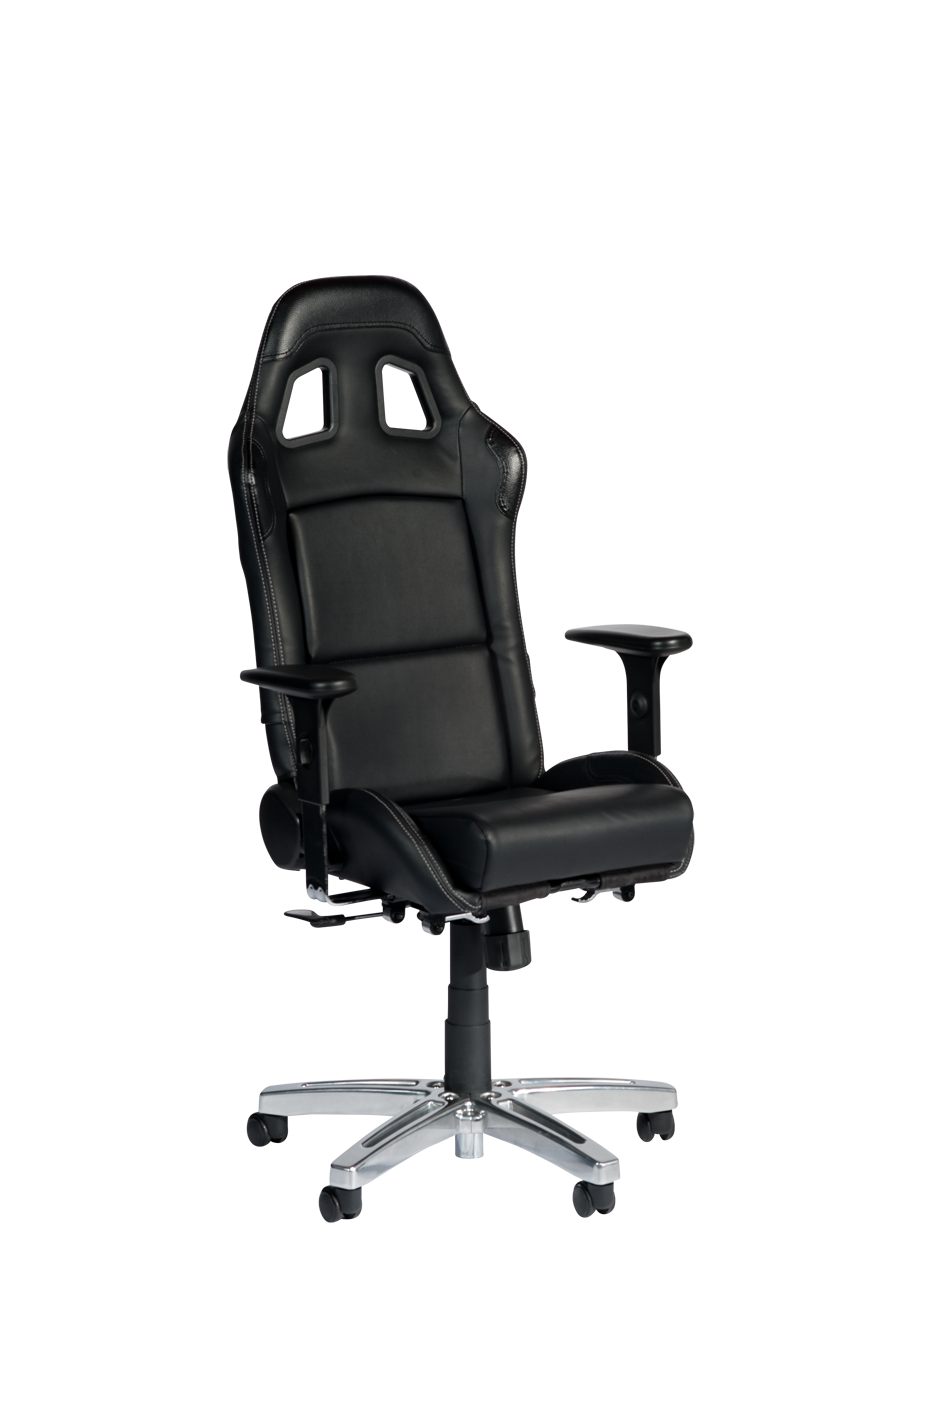 Office chair PNG image